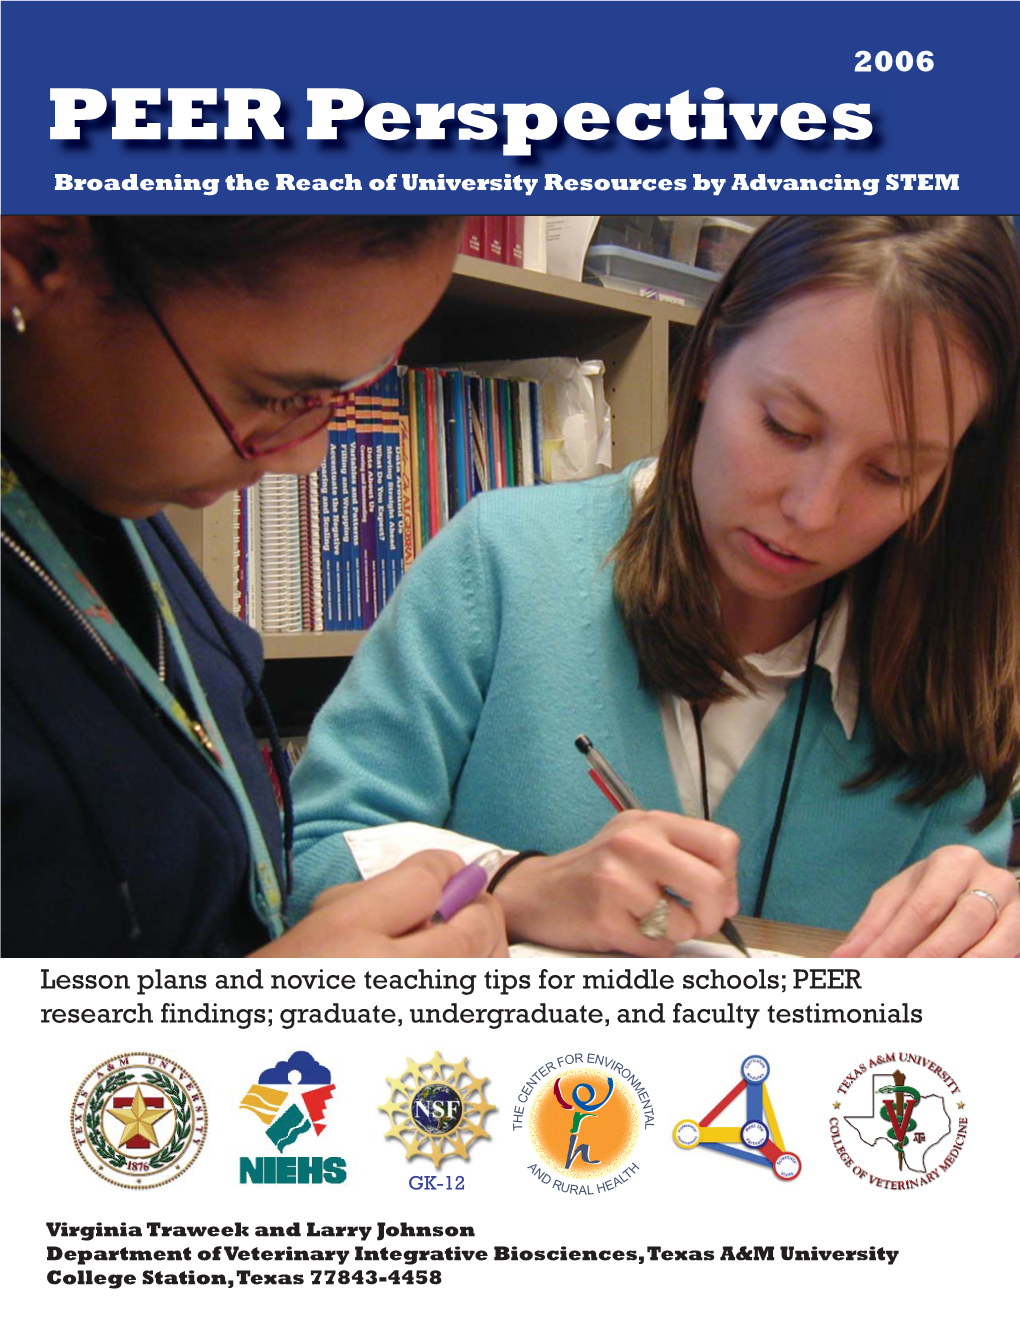 PEER Perspectives Broadening the Reach of University Resources by Advancing STEM